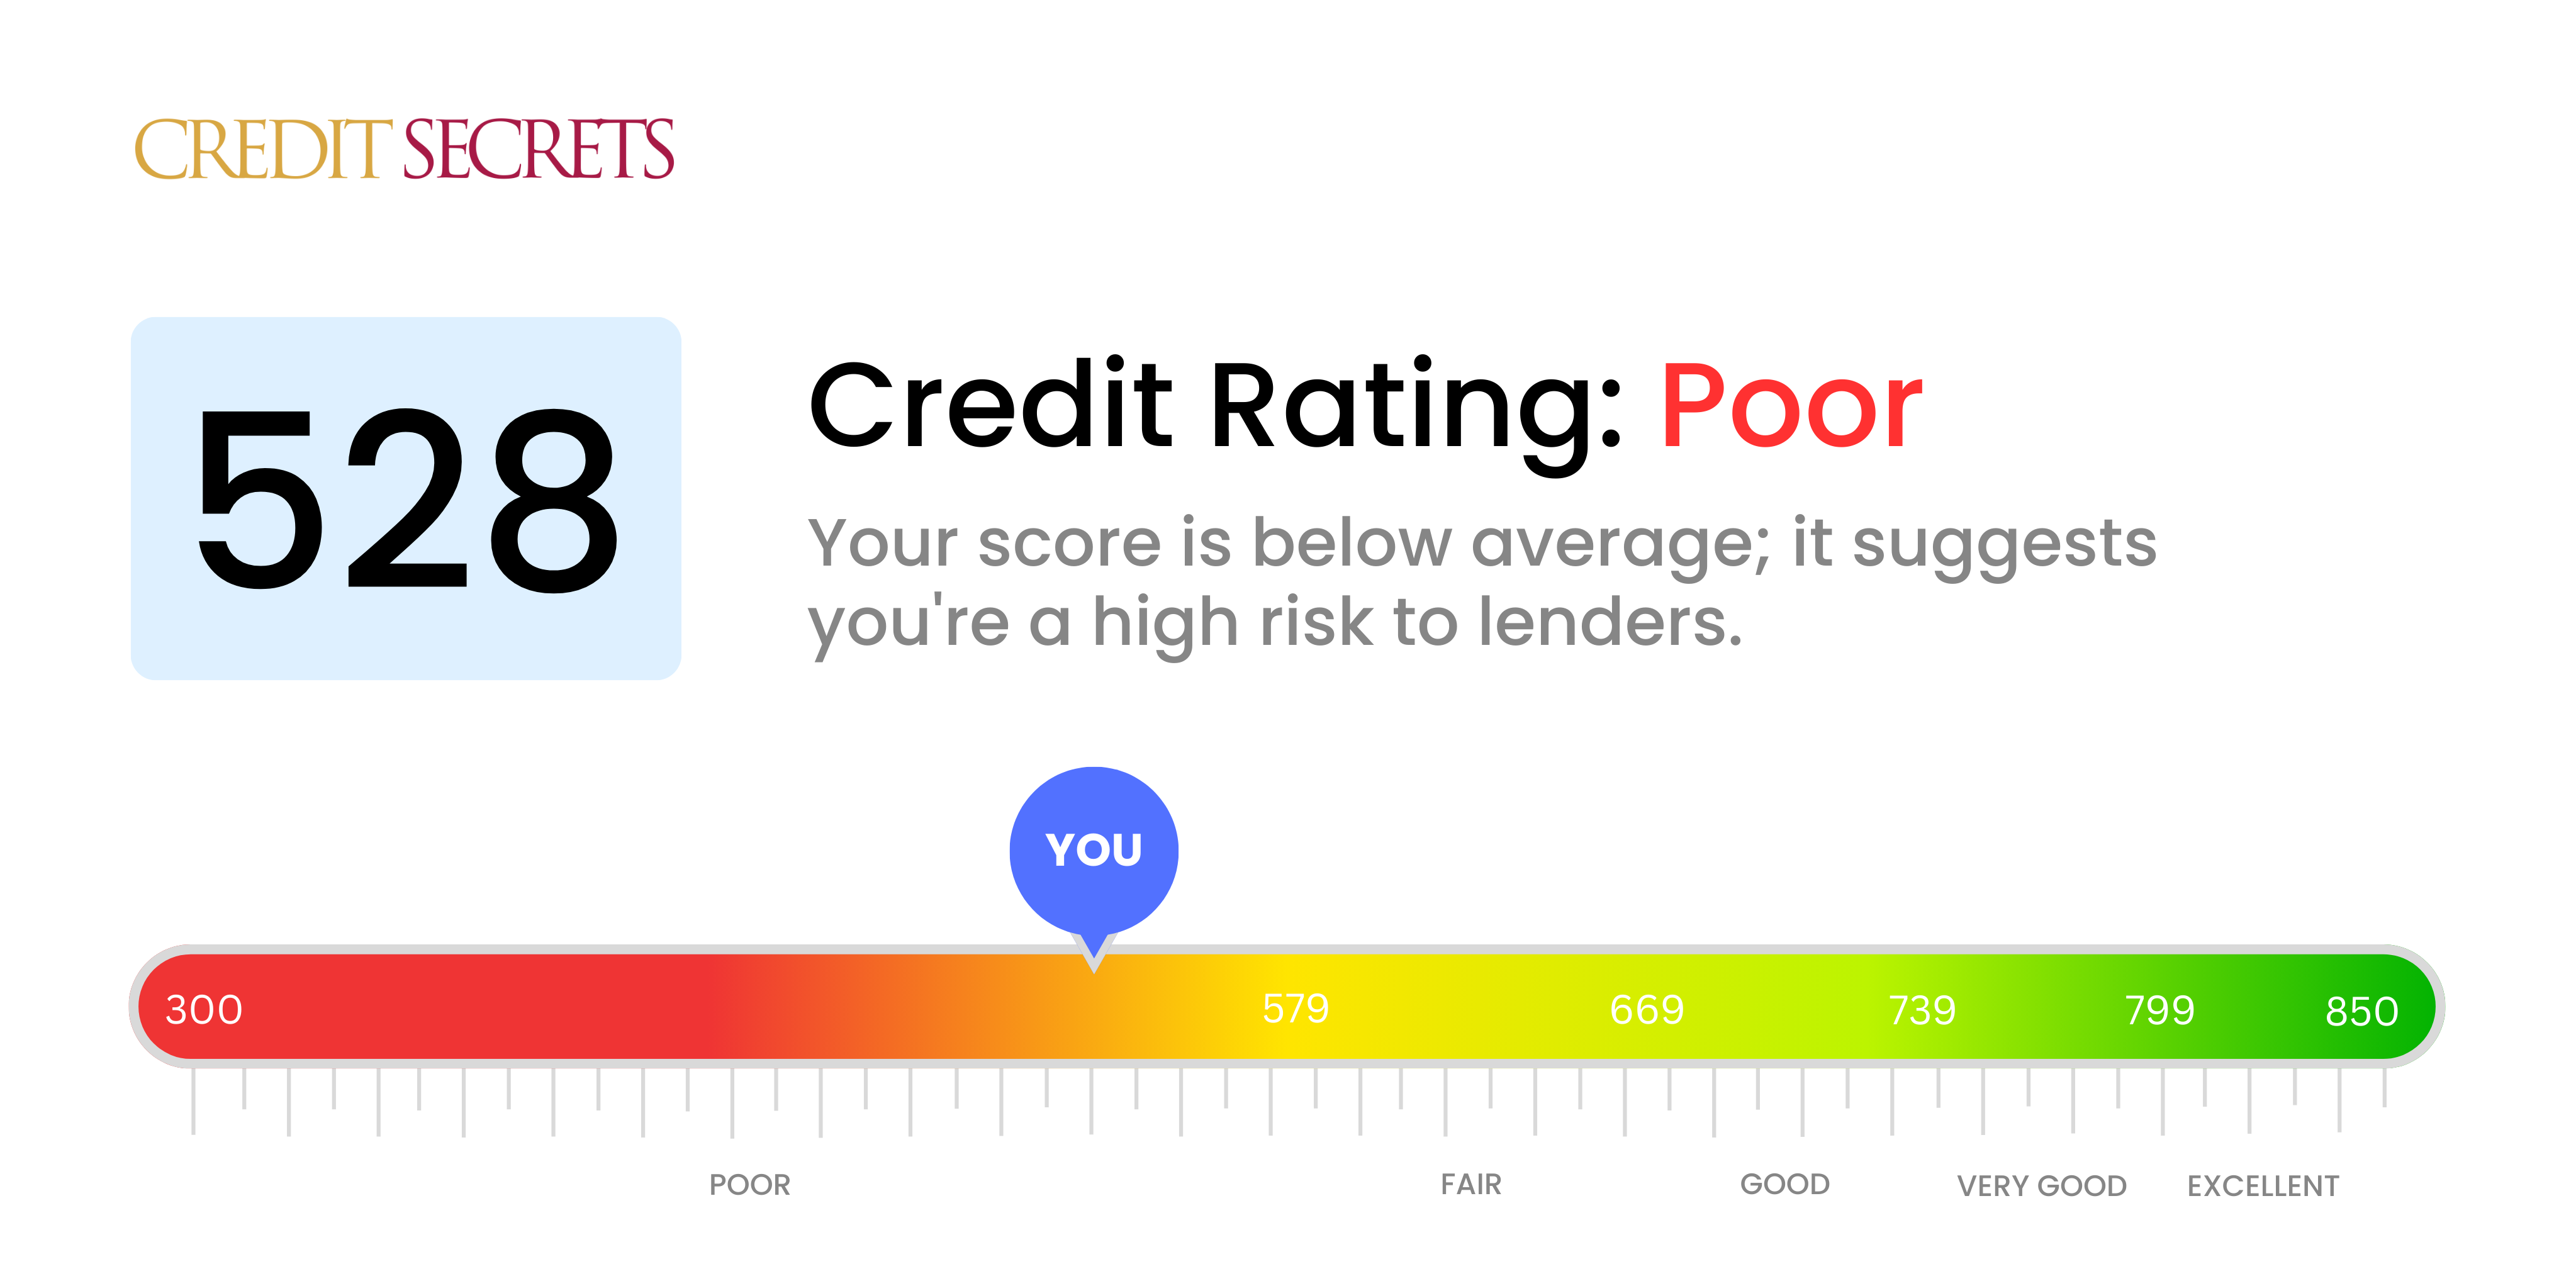 Is 528 a good credit score?